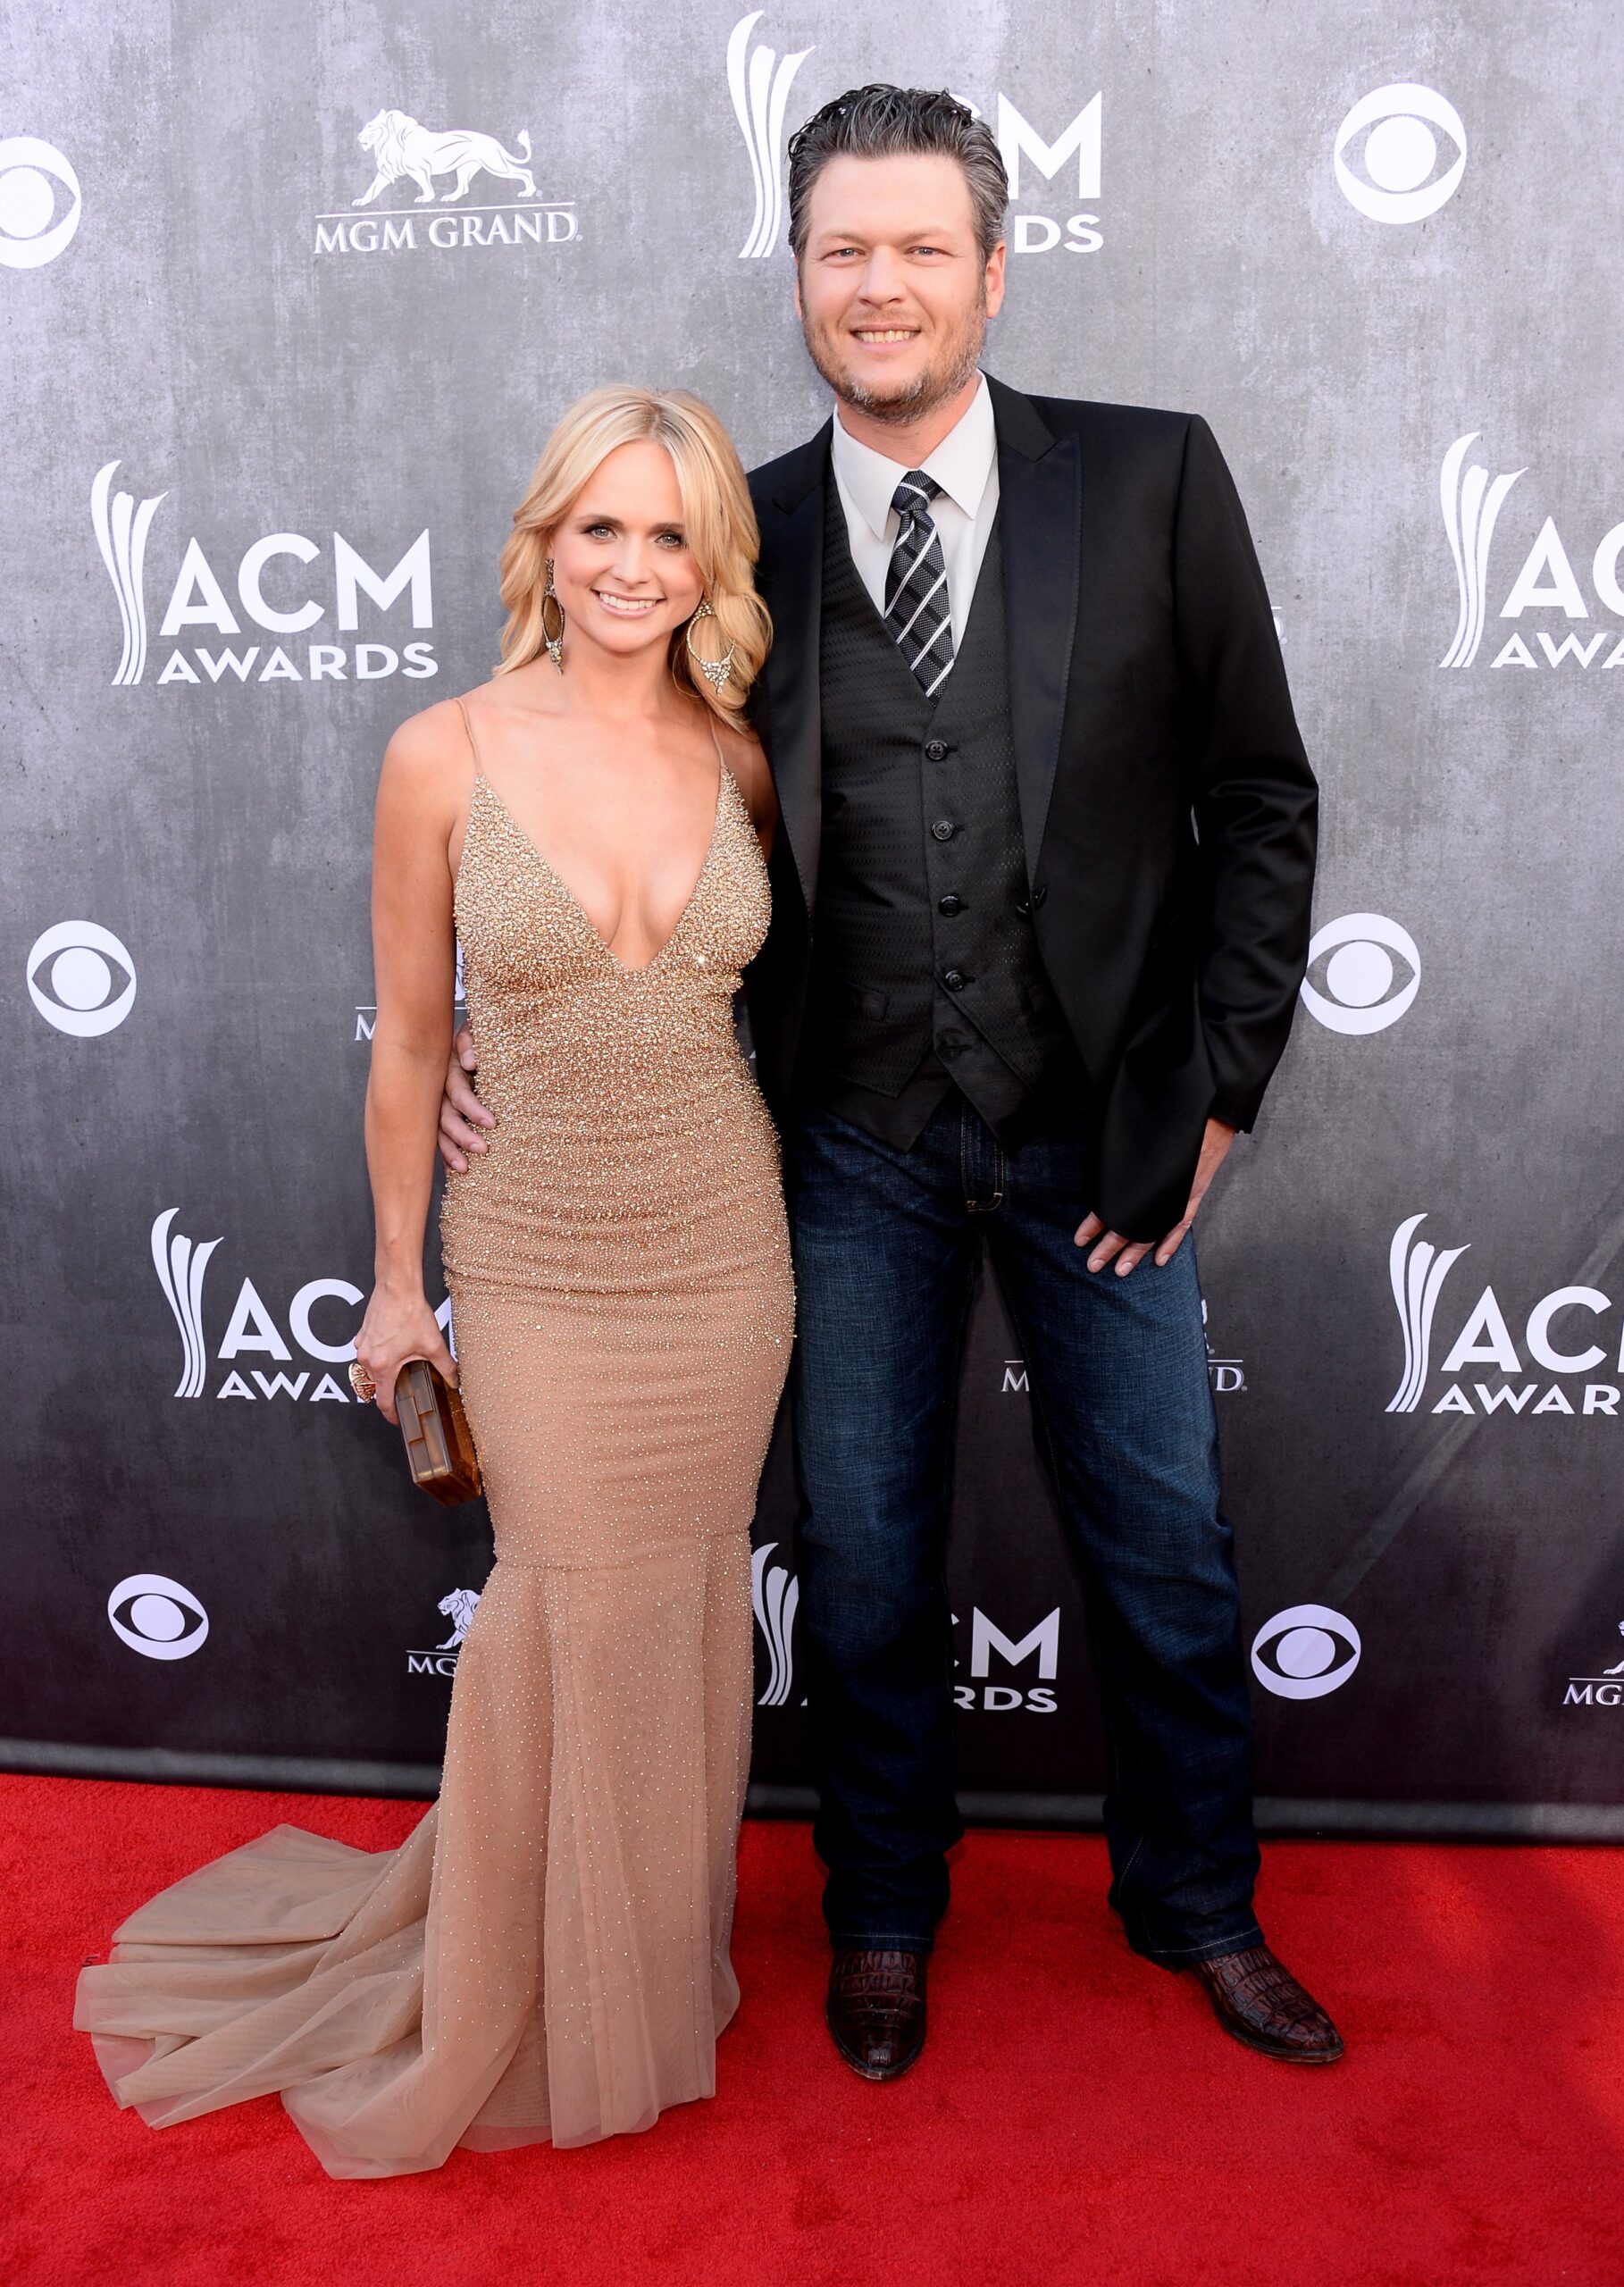 Miranda Lambert and Blake Shelton at the 49th Annual Academy of Country Music Awards on April 6, 2014, in Las Vegas, Nevada | Source: Getty Images